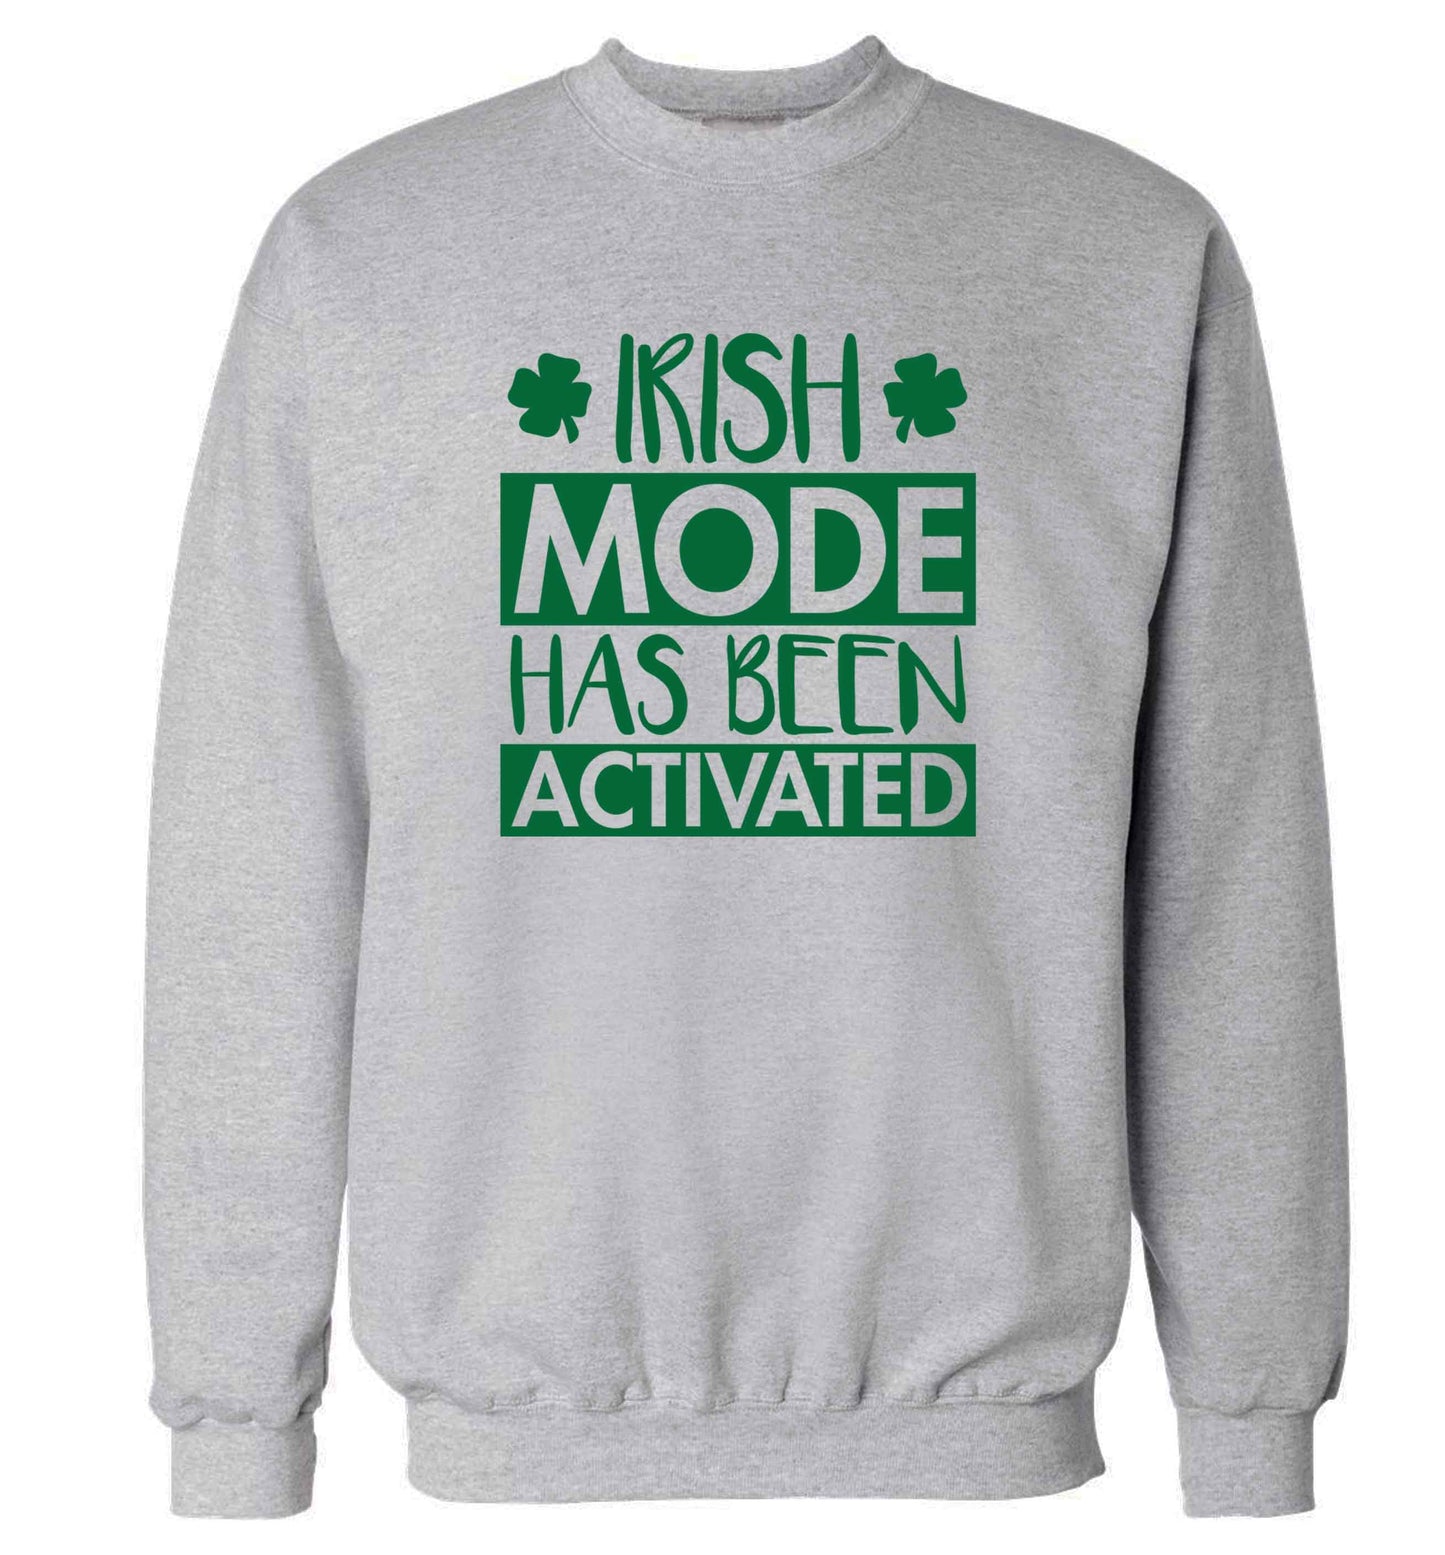 Irish mode has been activated adult's unisex grey sweater 2XL